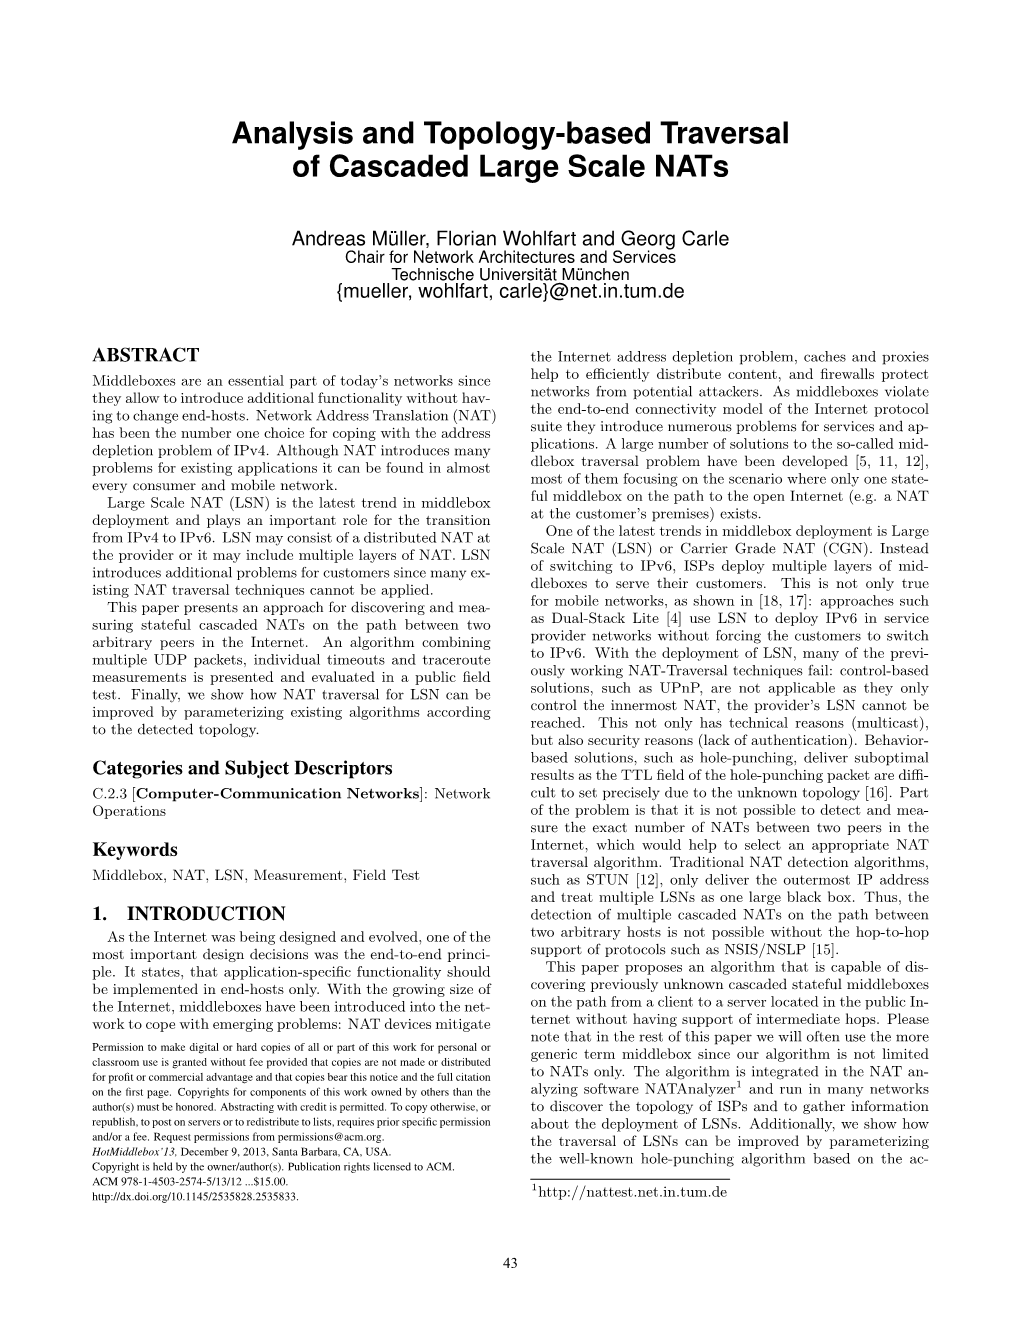 Analysis and Topology-Based Traversal of Cascaded Large Scale Nats